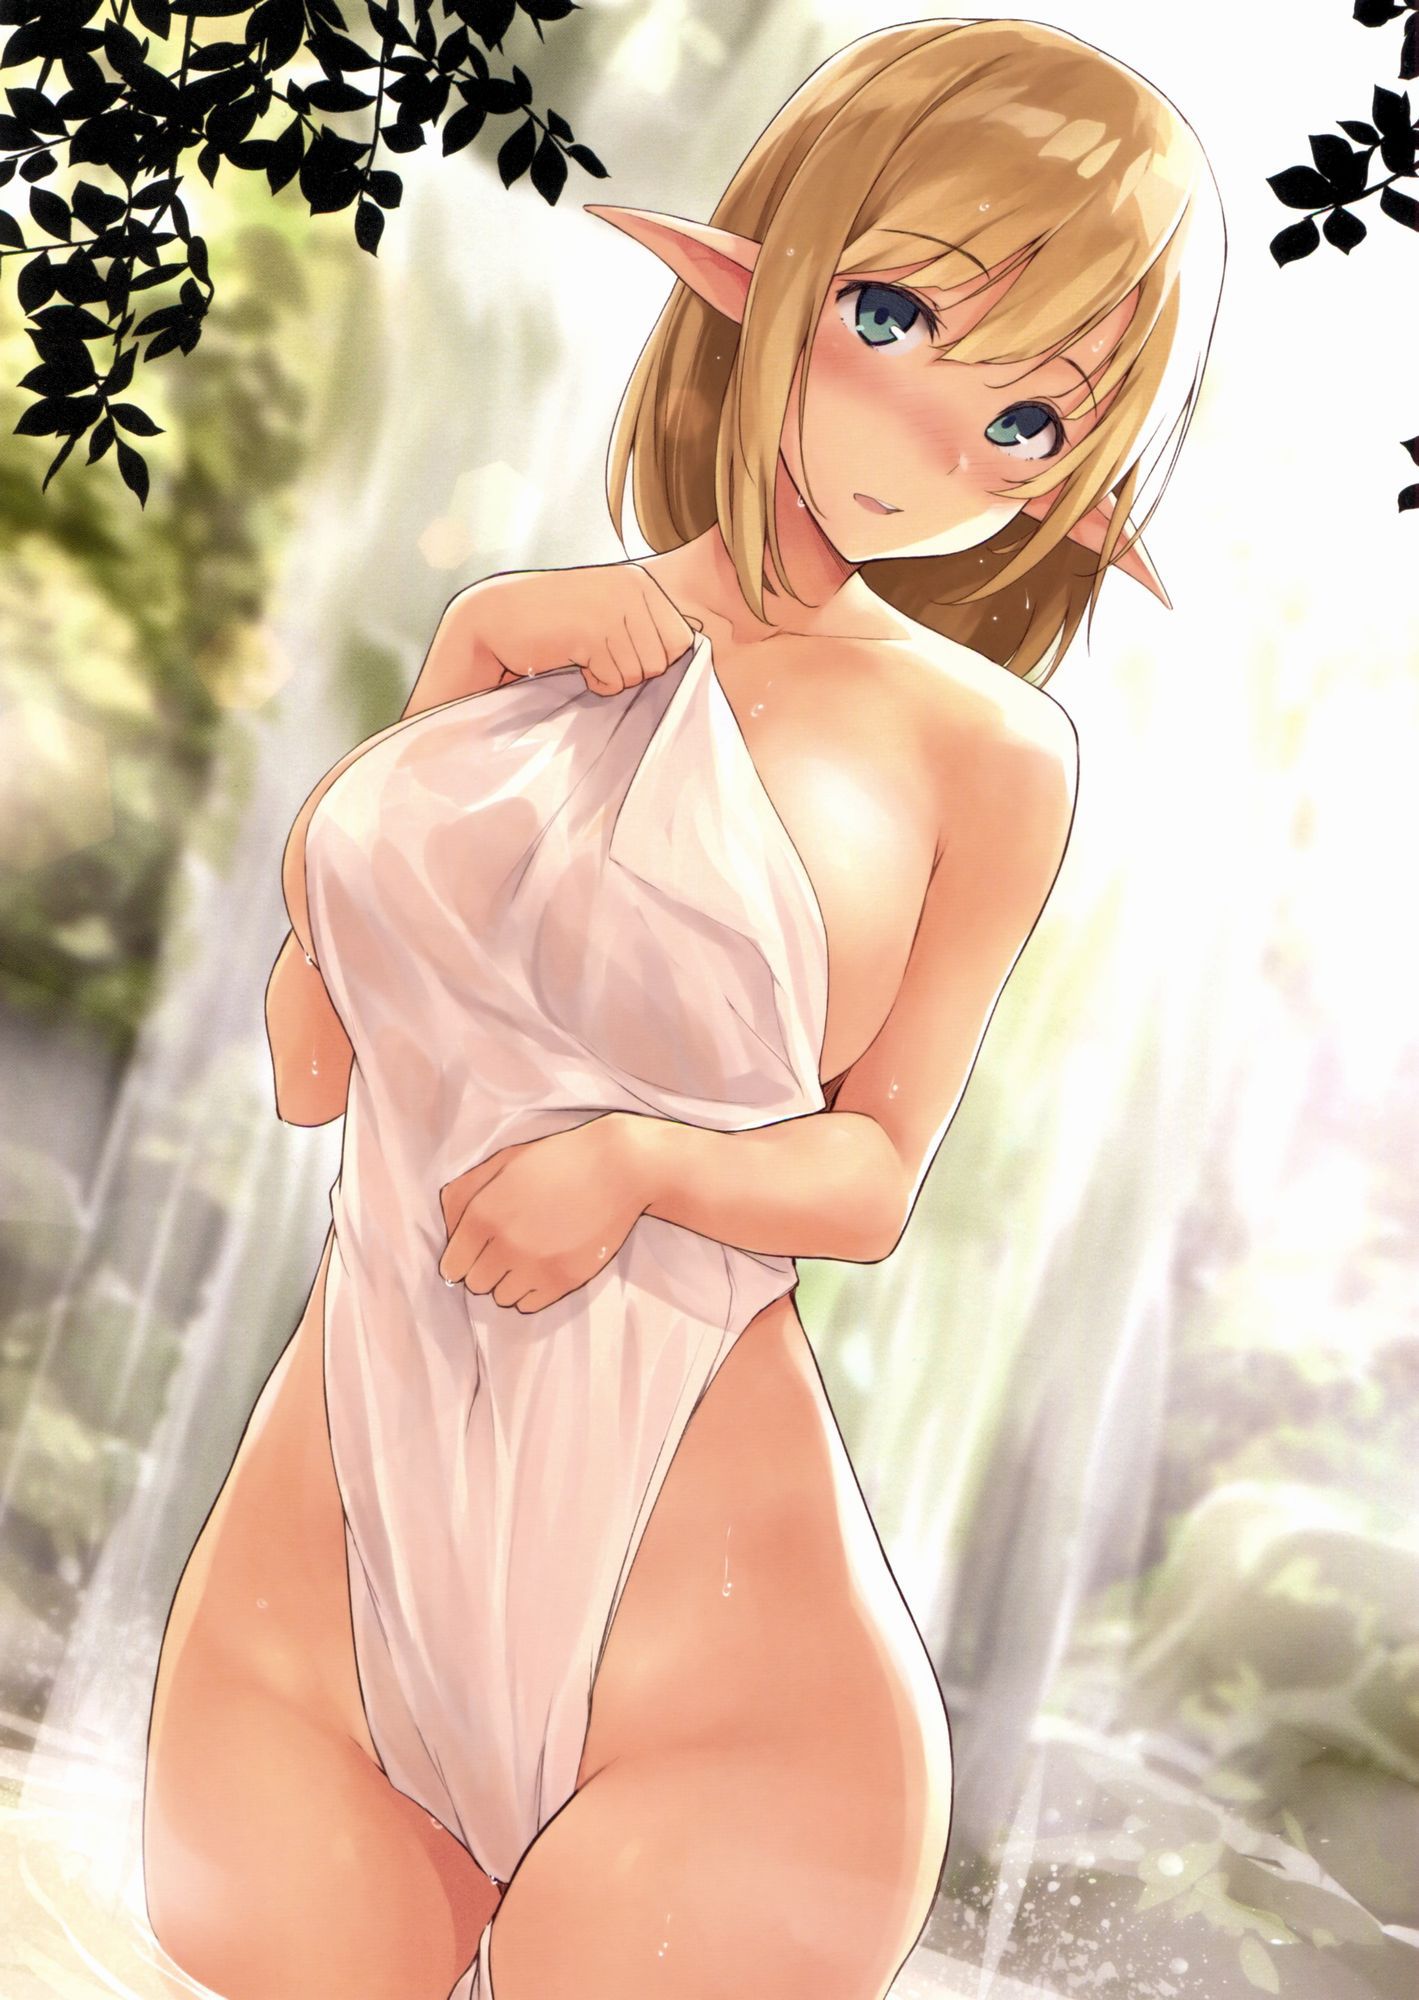 【Erotic Anime Summary】 Dosukebe Beauty and Beautiful Girls Hiding Their Nudity with a Single Towel 【Secondary Erotic】 15